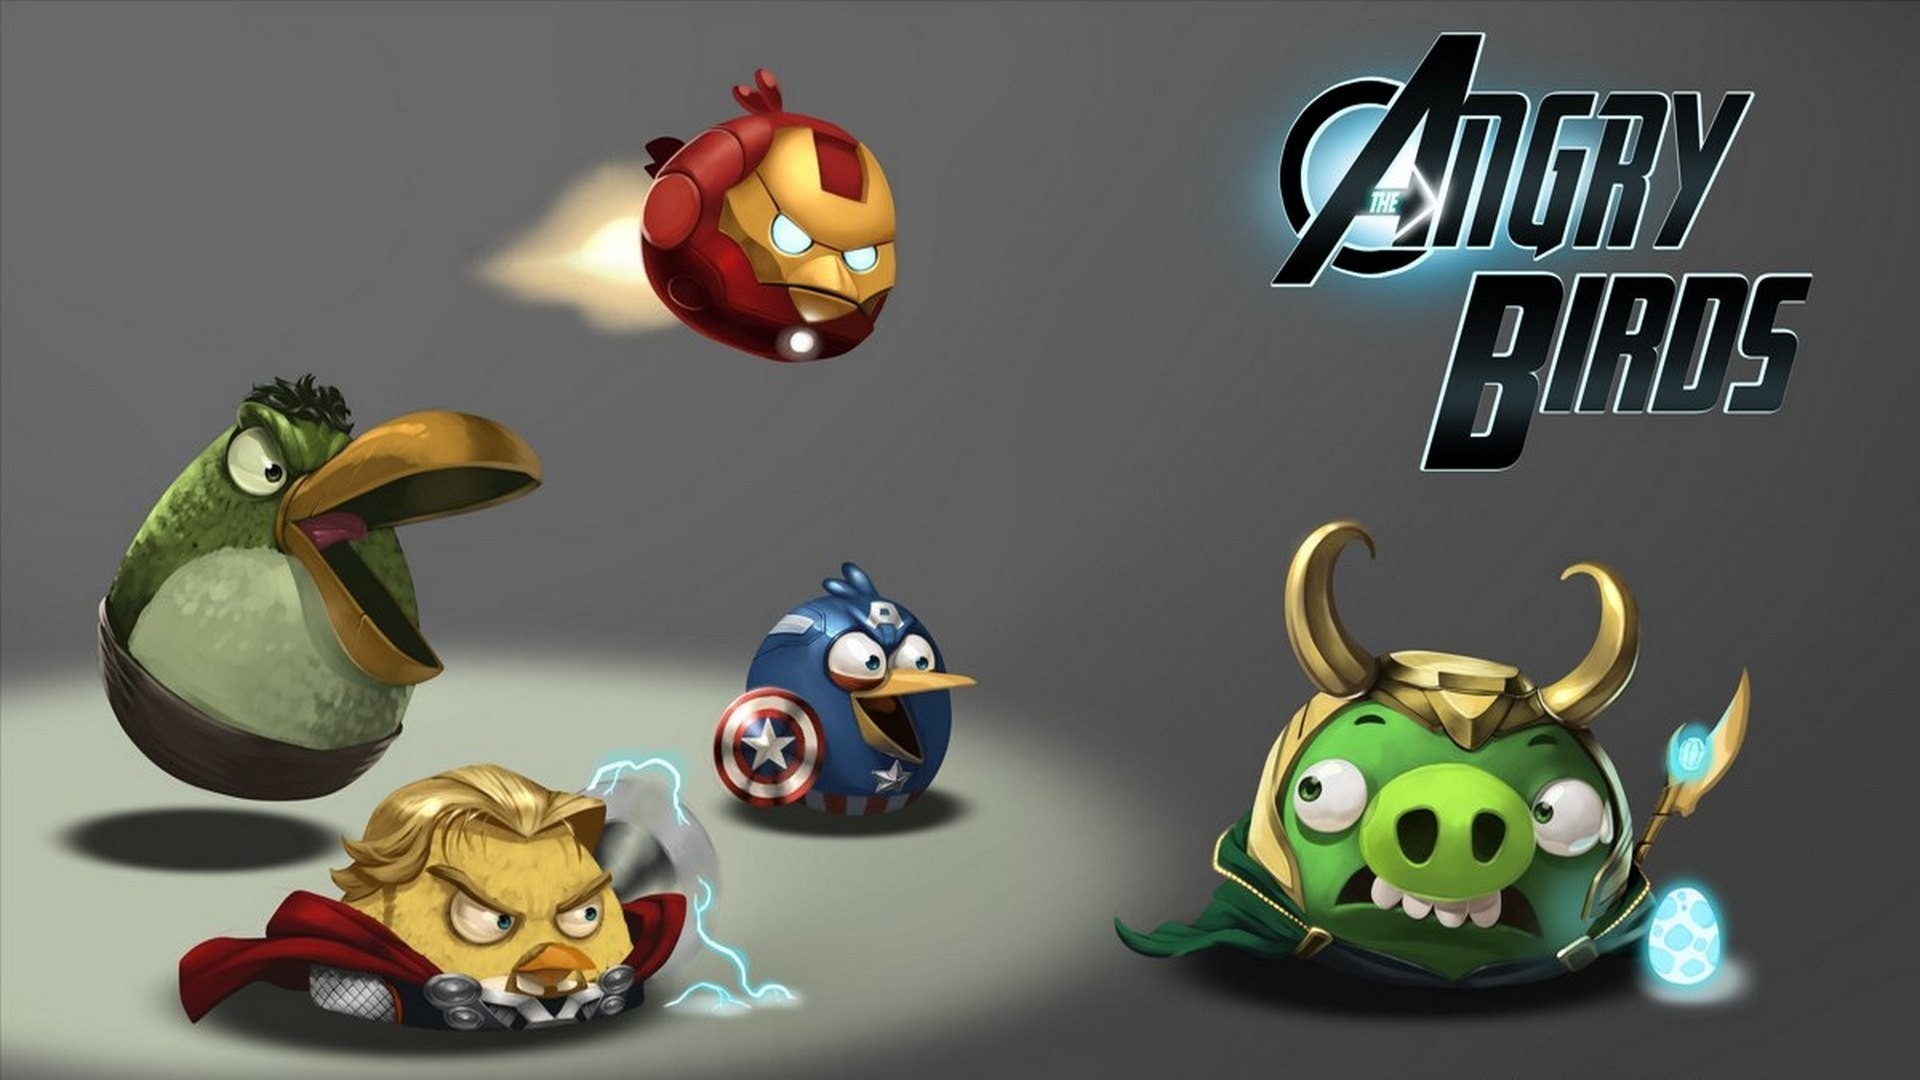 Angry Birds Game Wallpapers #8 - 1920x1080